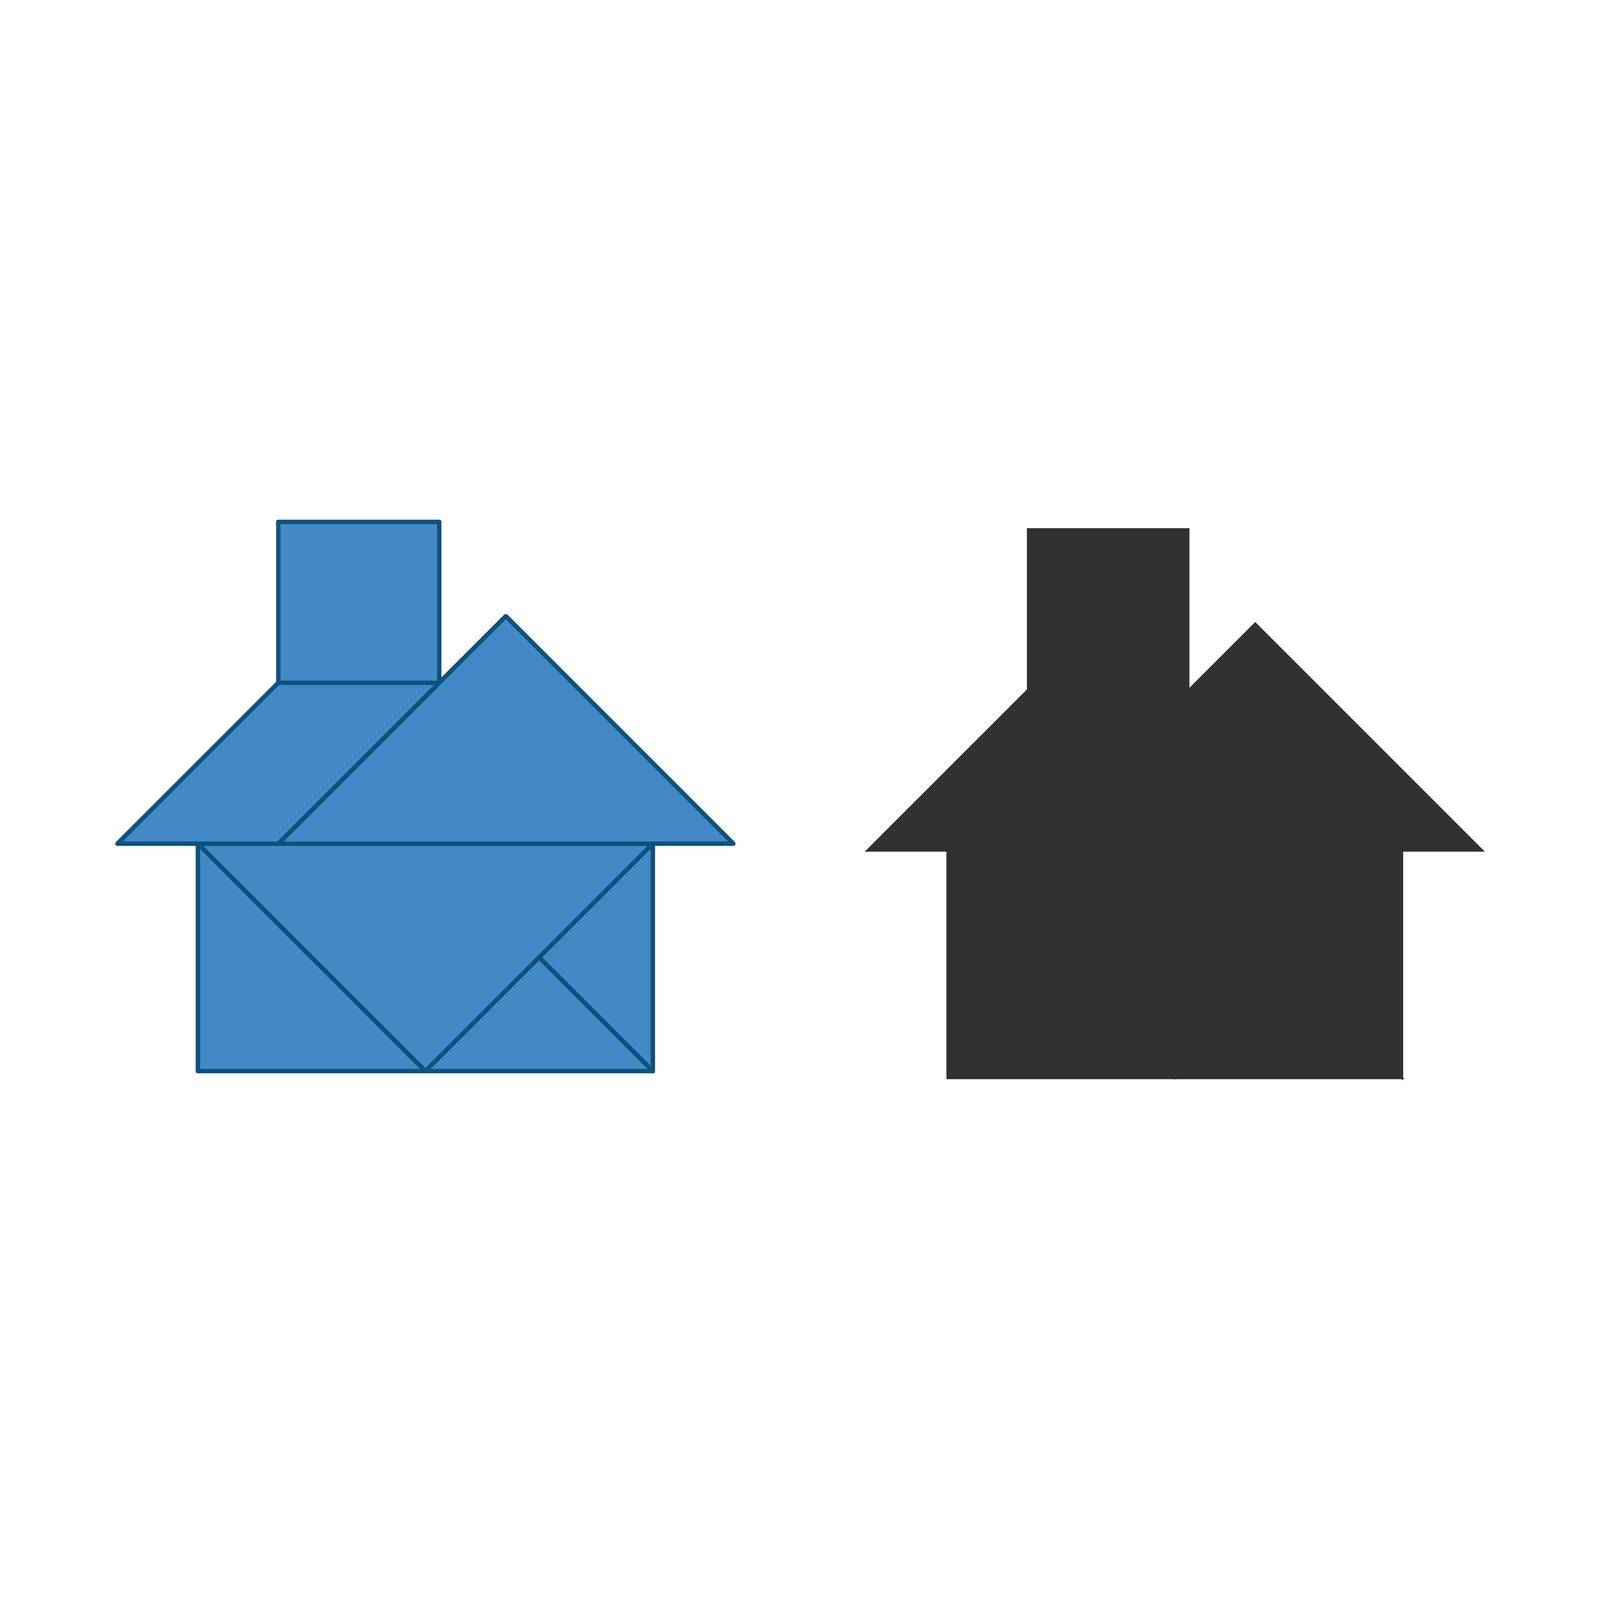 House Tangram. Traditional Chinese dissection puzzle, seven tiling pieces - geometric shapes: triangles, square rhombus , parallelogram. Board game for kids that helps to develop analytical skills.